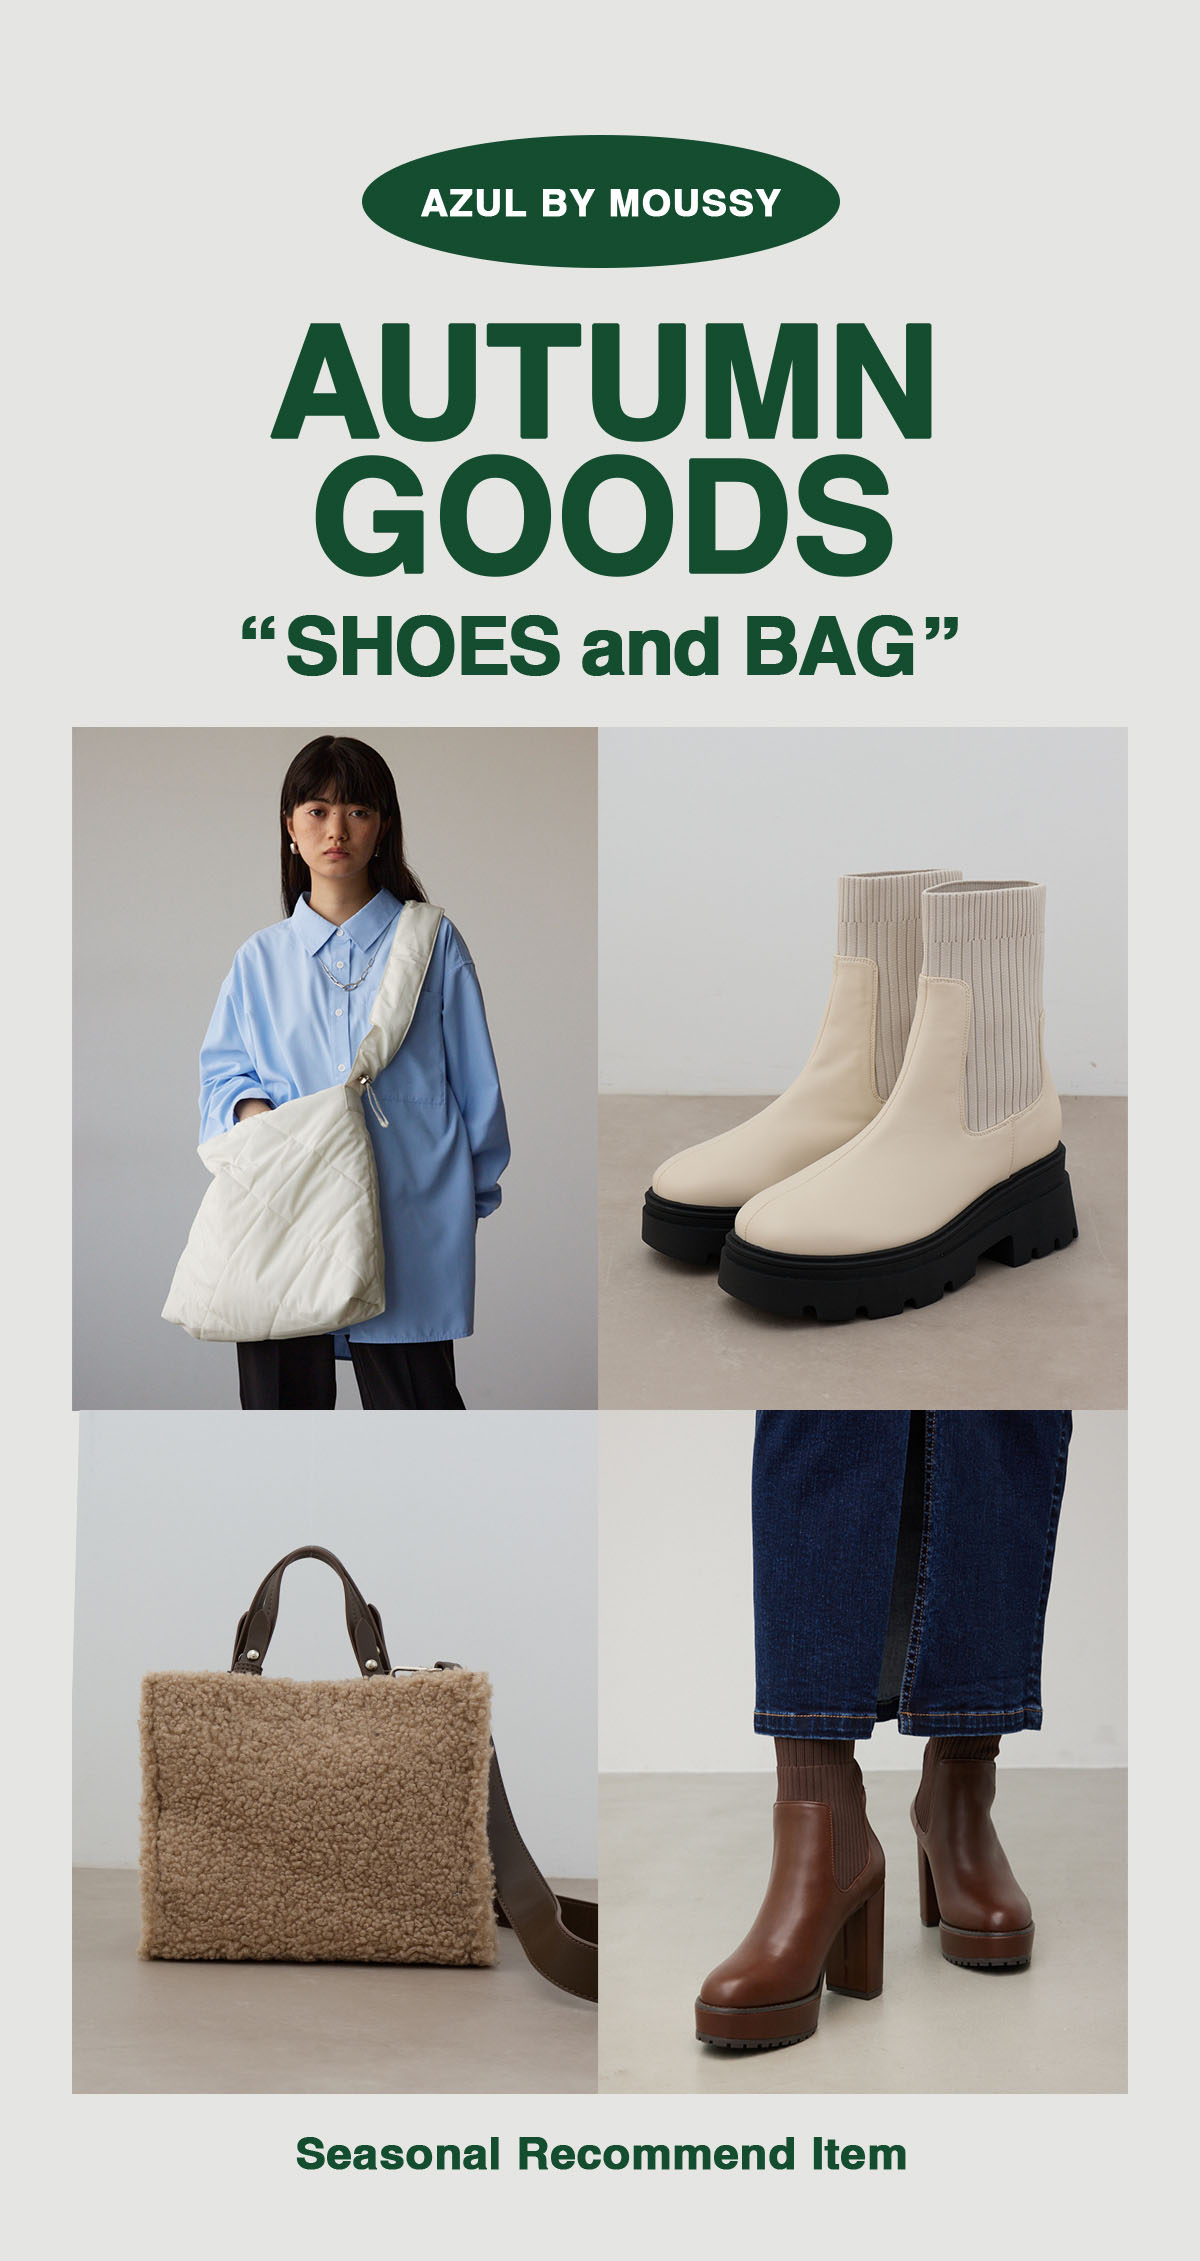 AUTUMN GOODS ”SHOES and BAG”／Seasonal Recommend Item